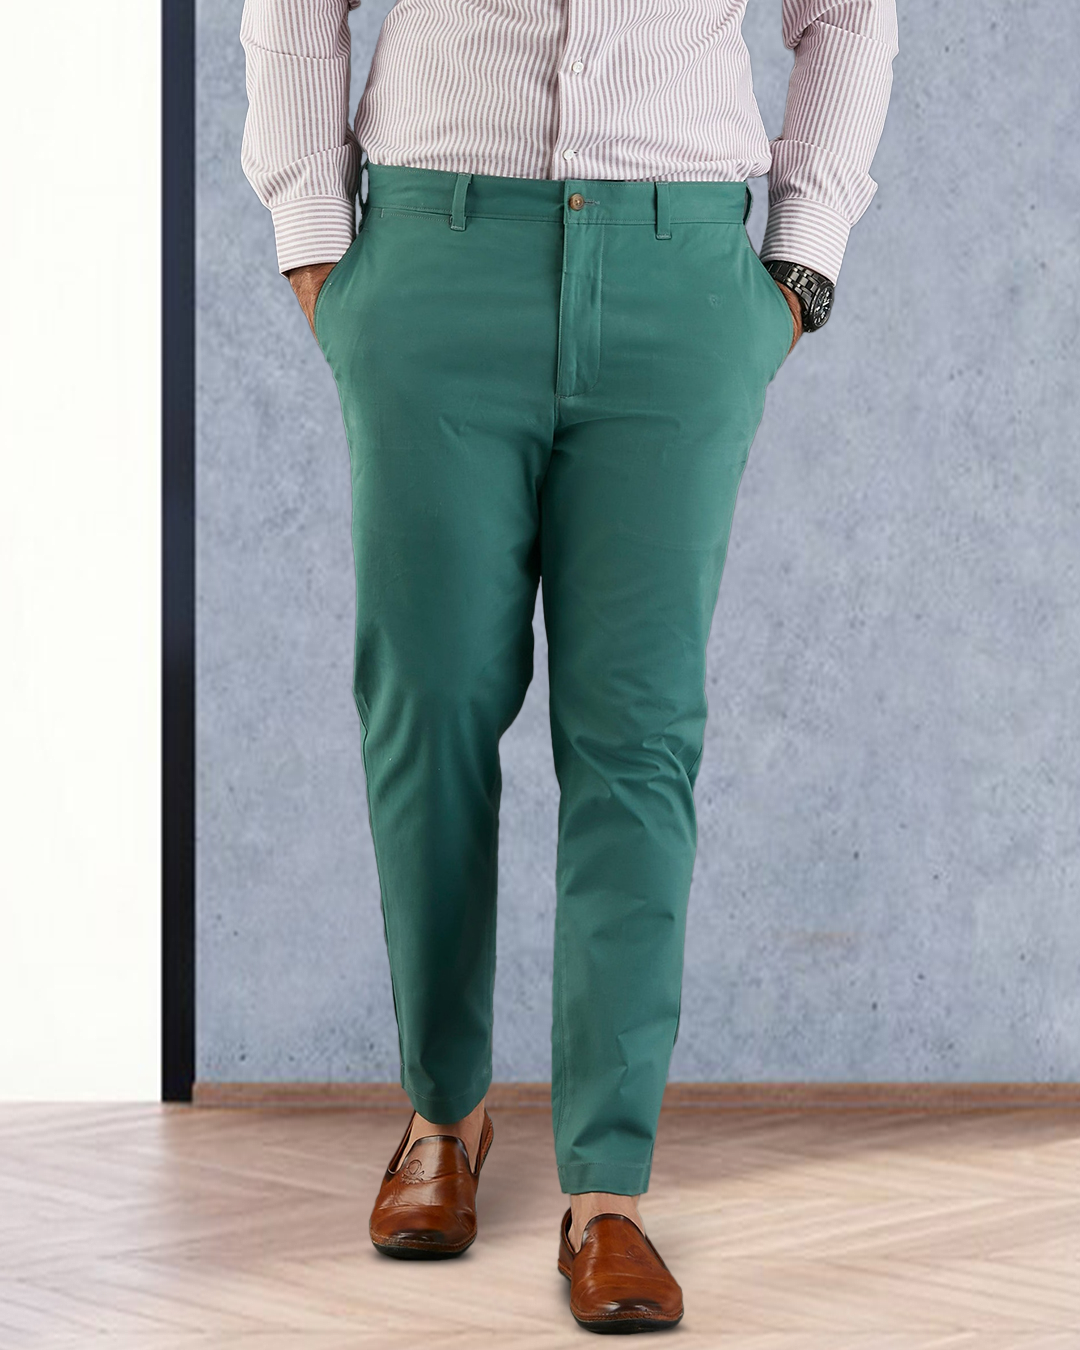 Model close up view of custom Genoa Chino pants for men by Luxire in fern green